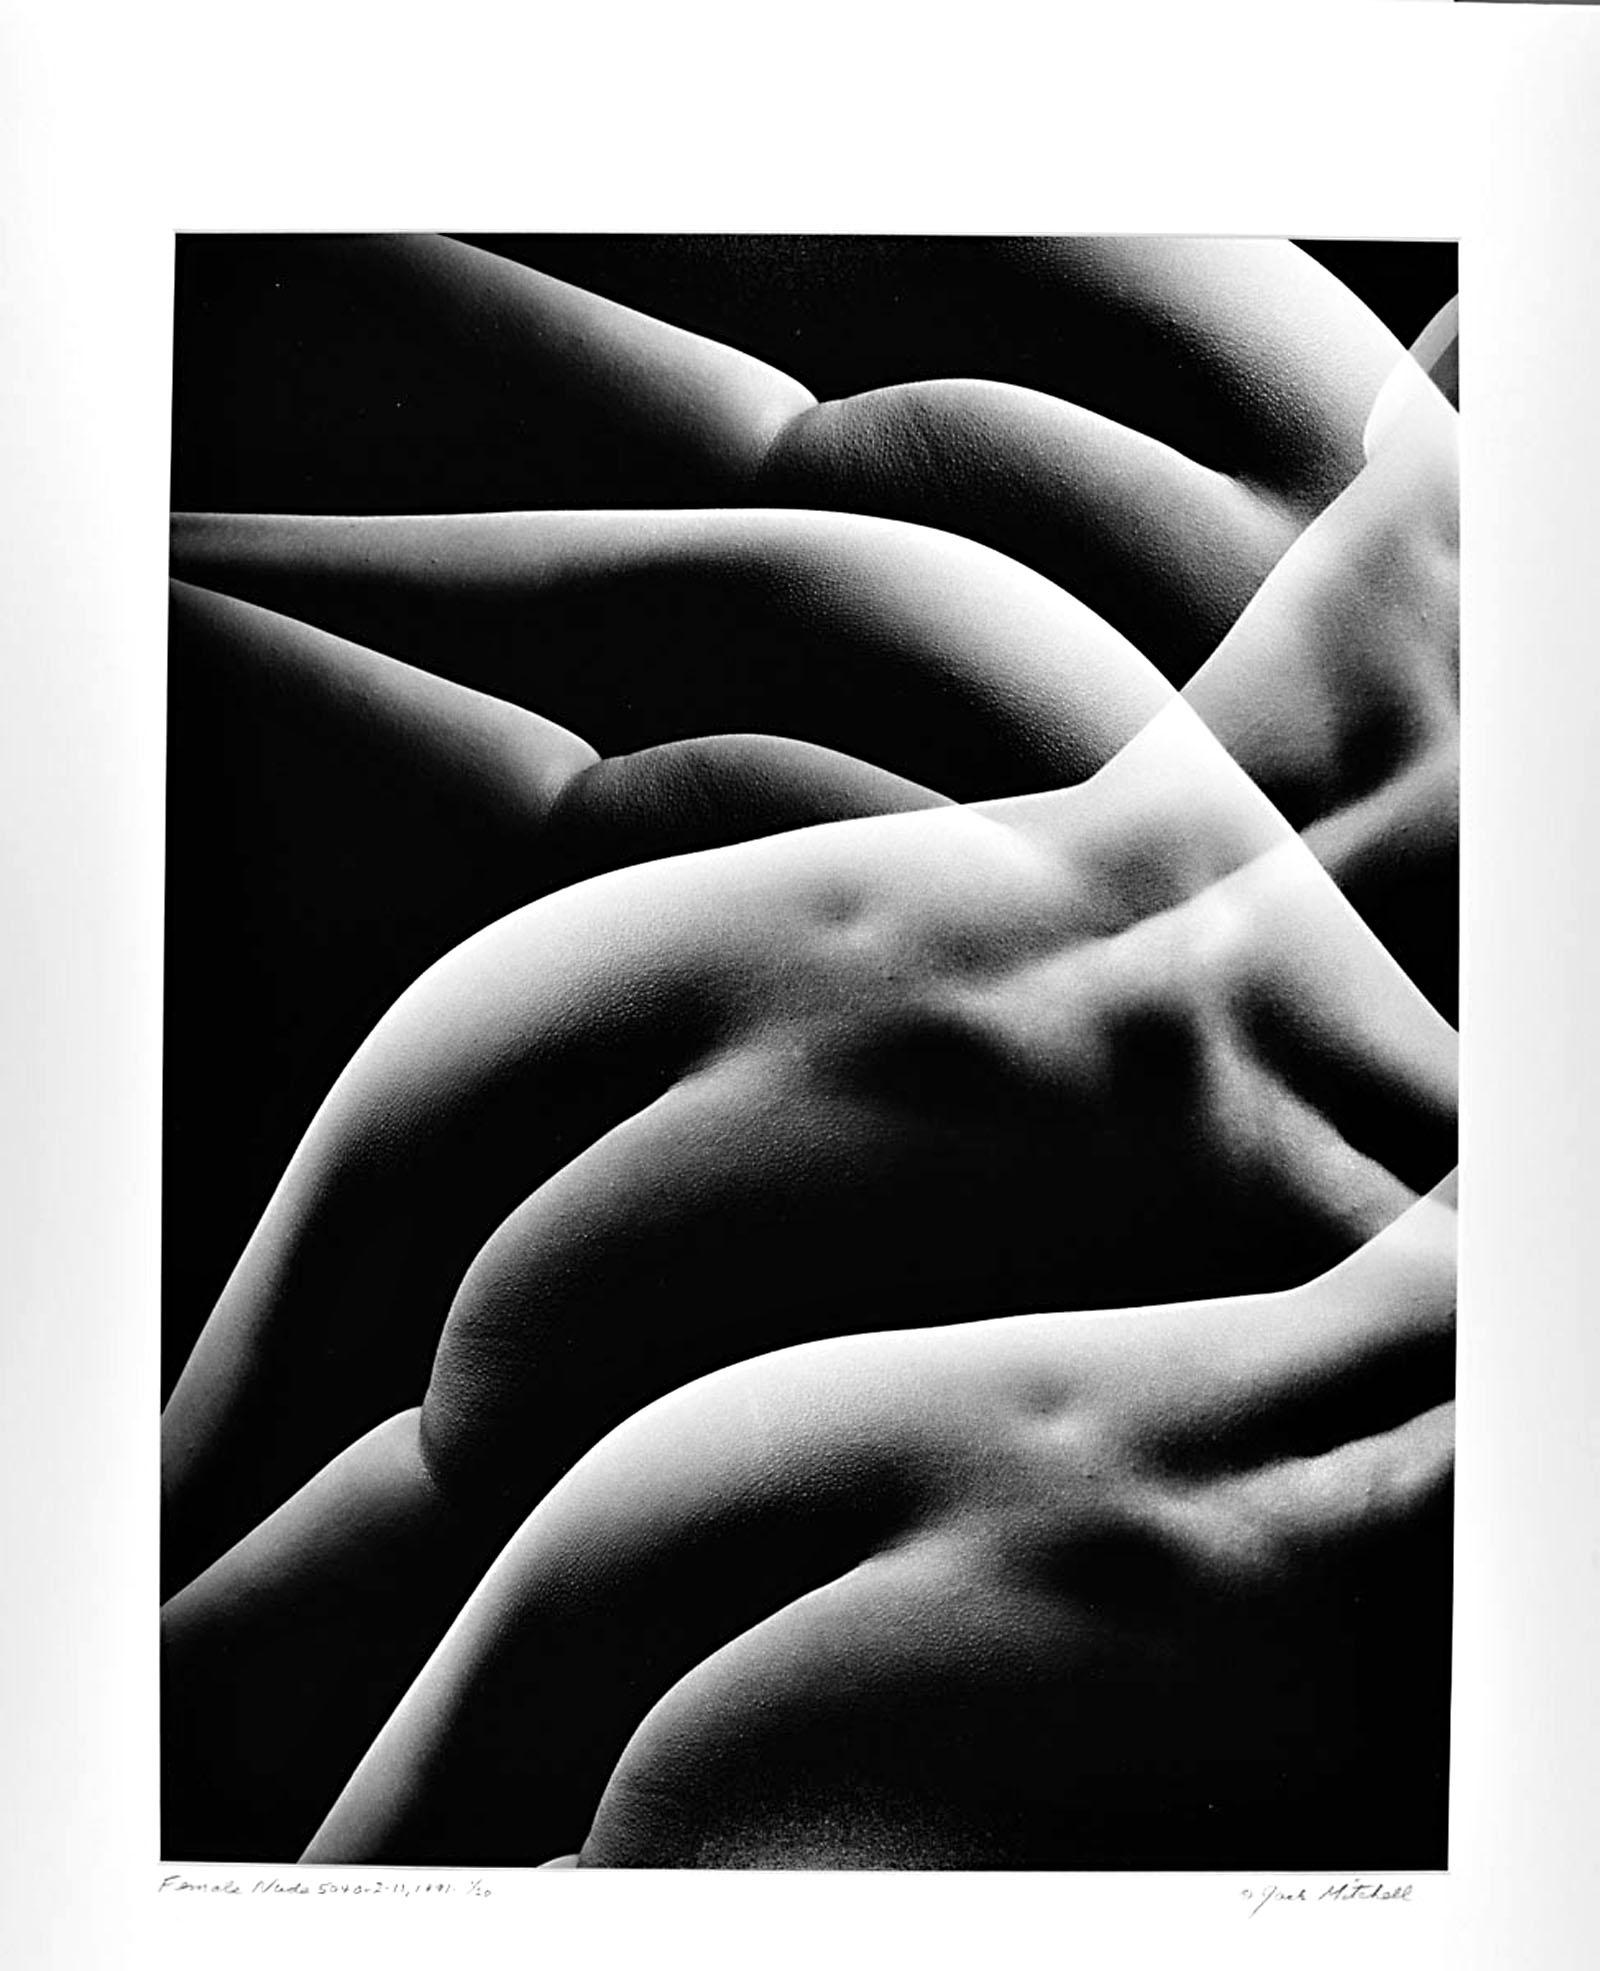 Jack Mitchell Black and White Photograph - Female Nude from Numbered Nudes Series multiple exposure signed exhibition print